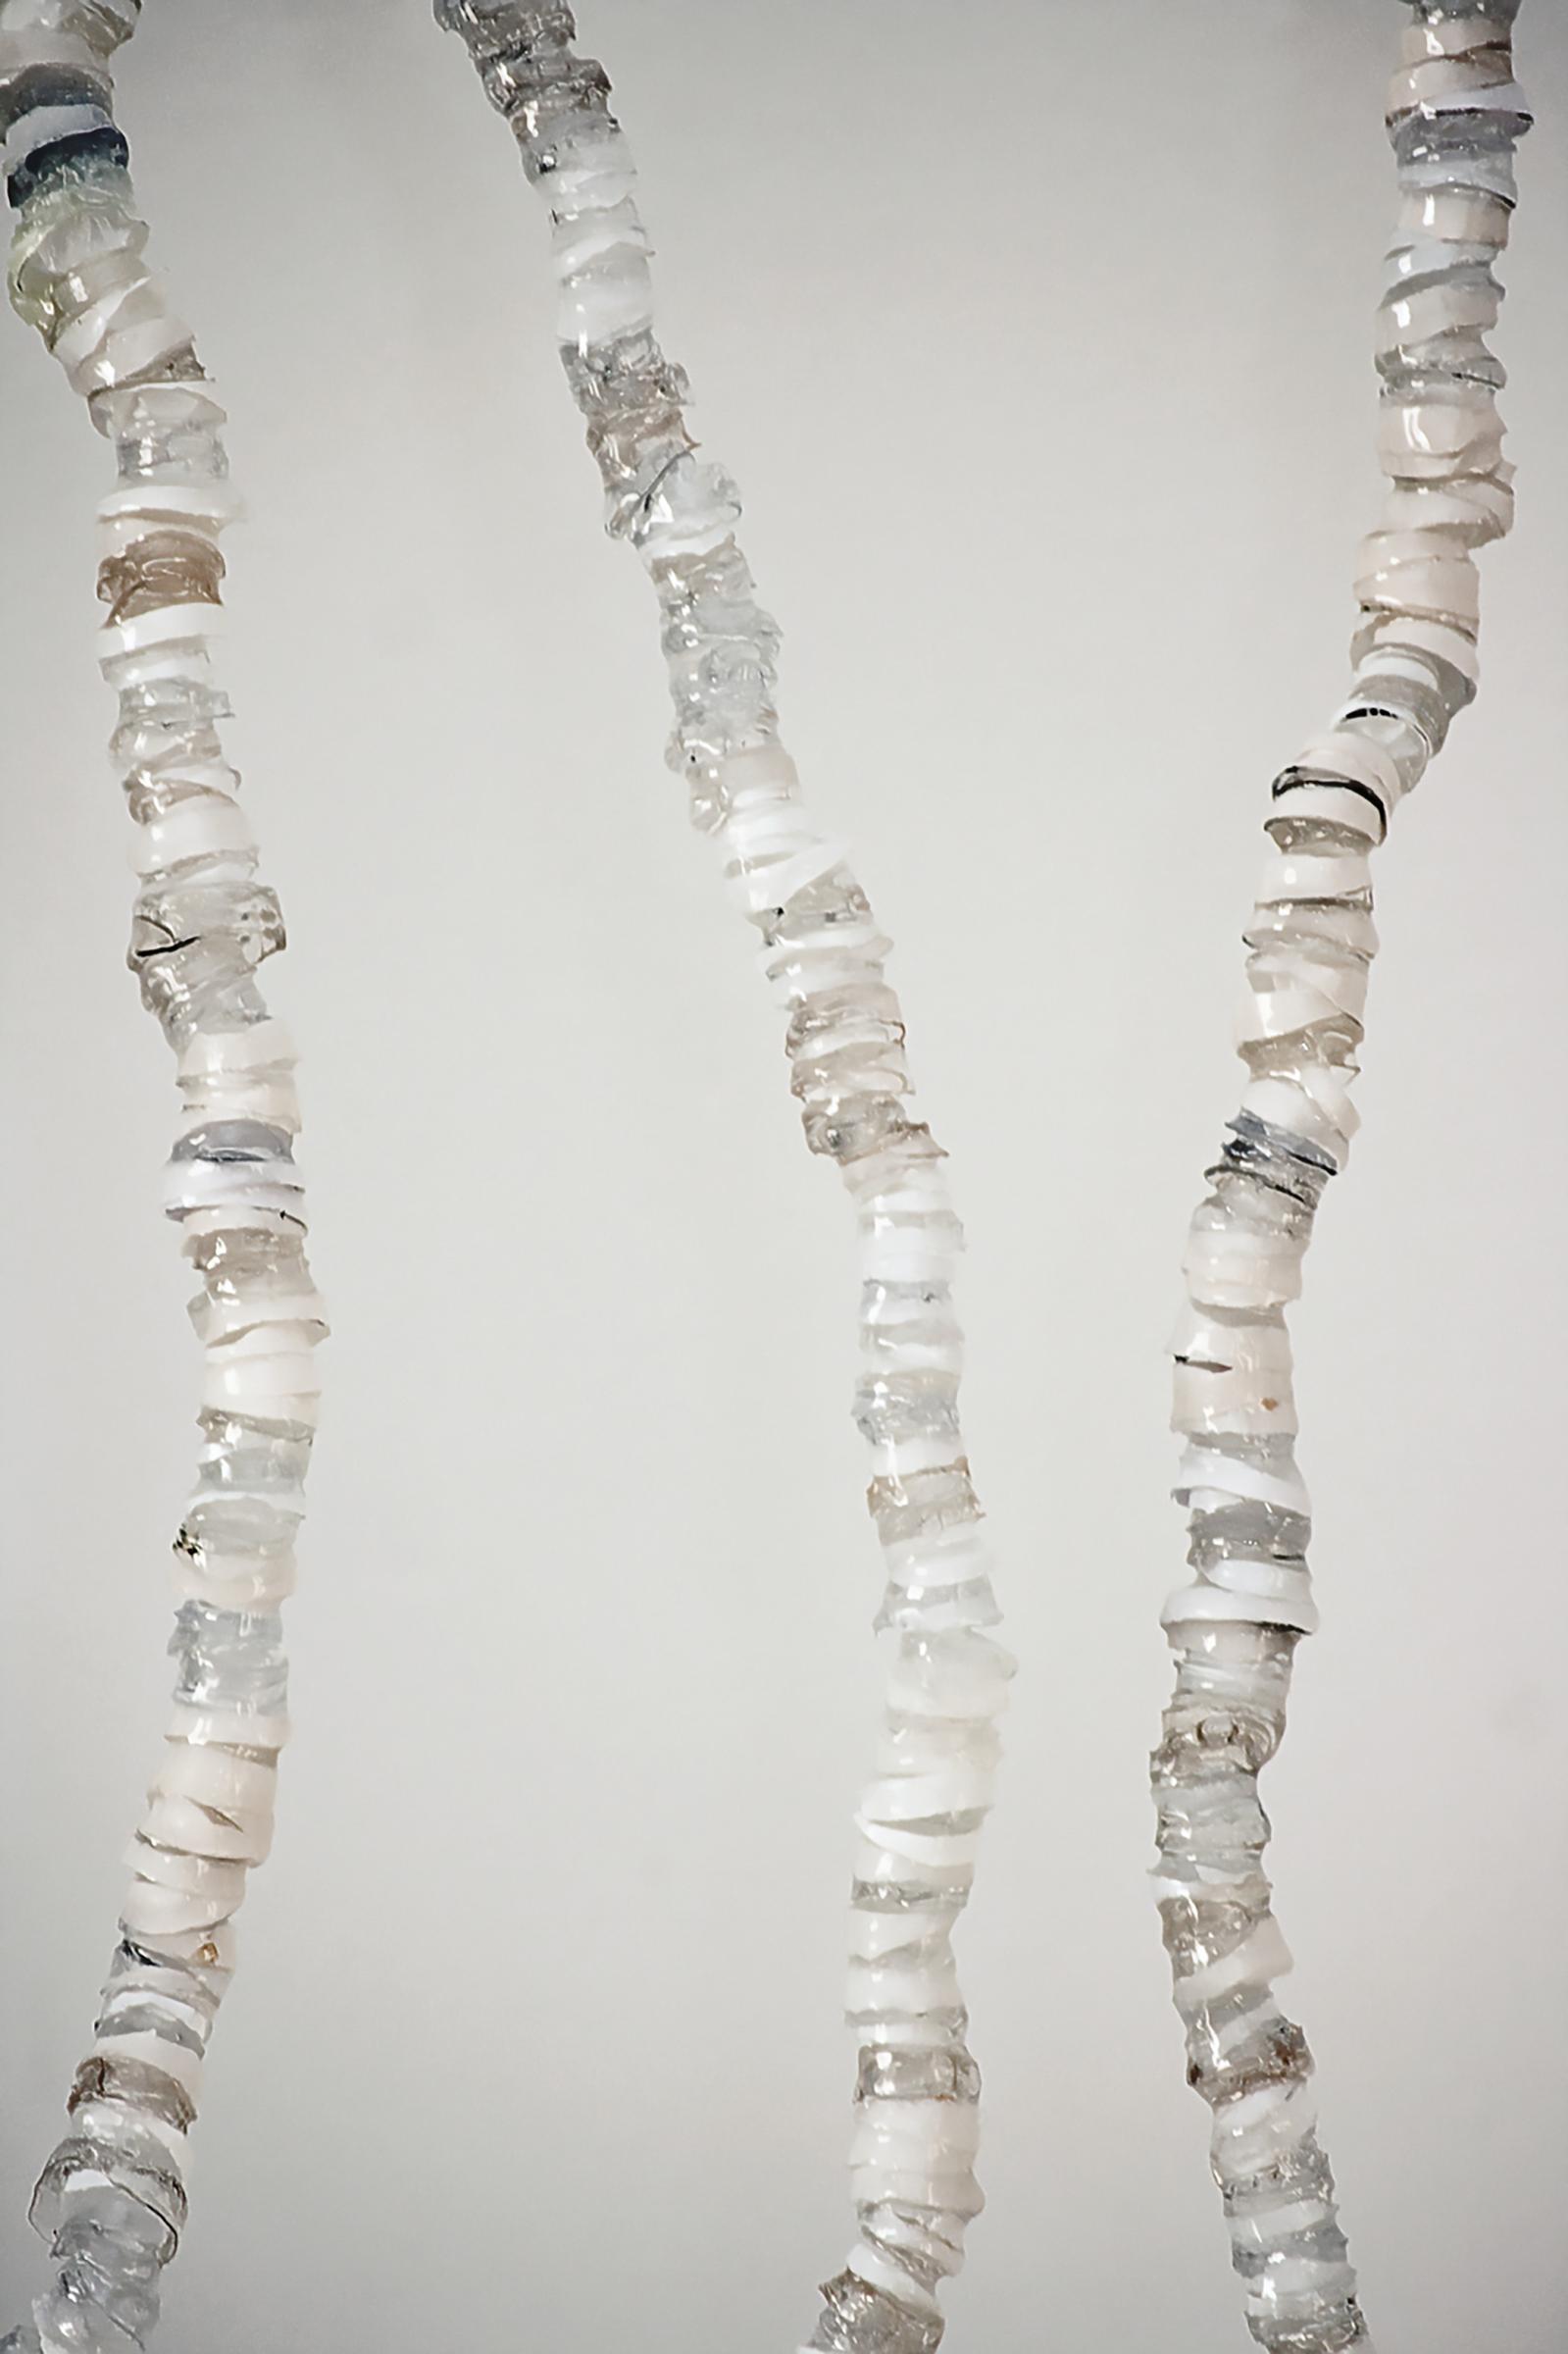  A close-up of a sculpture presenting three curved columns resembling spines, composed of translucent, grey, and white segments against a light grey background, intentionally designed to break and be repaired daily.